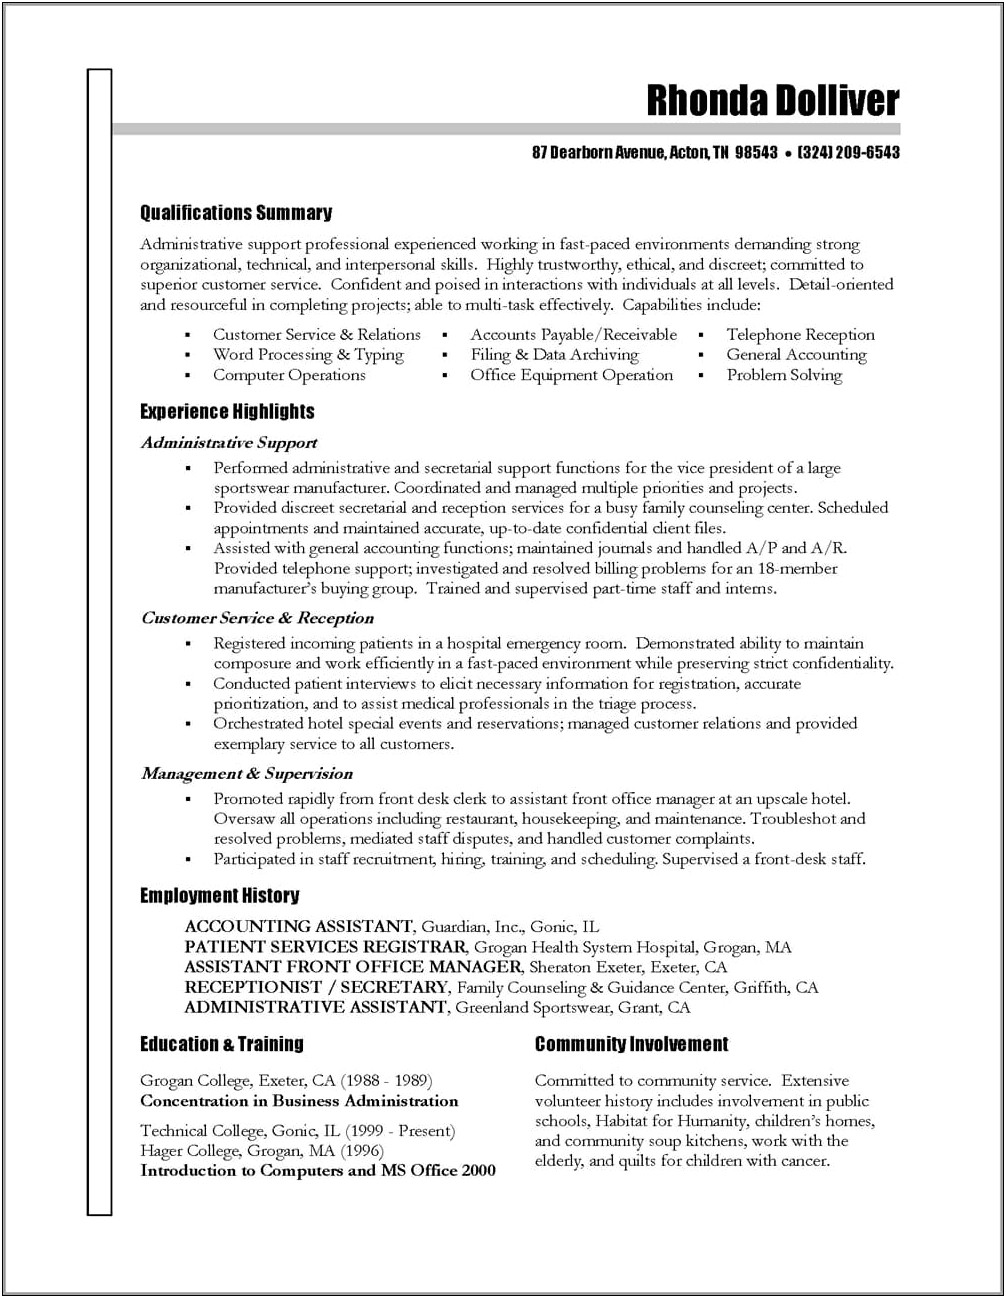 Administrative Assistant Job Resume Template